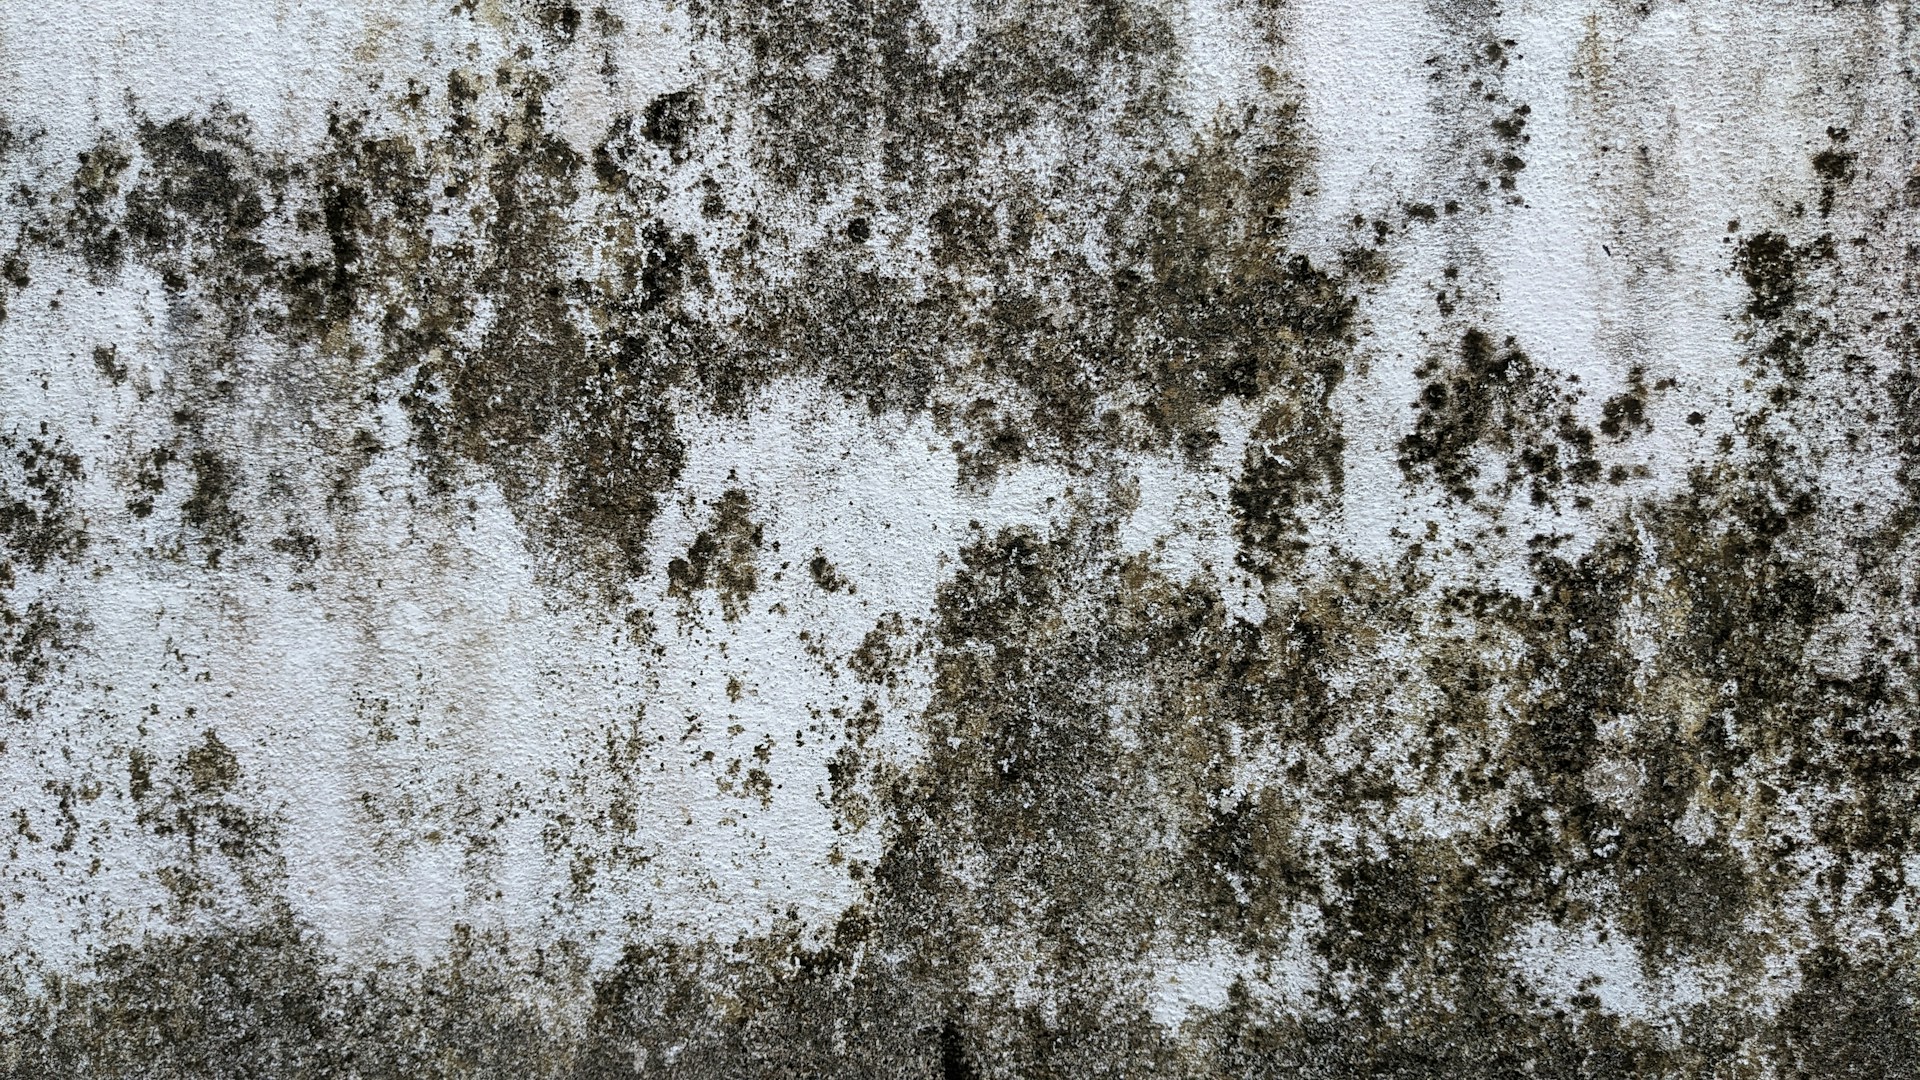 Mold Damage and Building Materials: Understanding How Different Surfaces and Materials React to Mold Growth and Remediation Methods